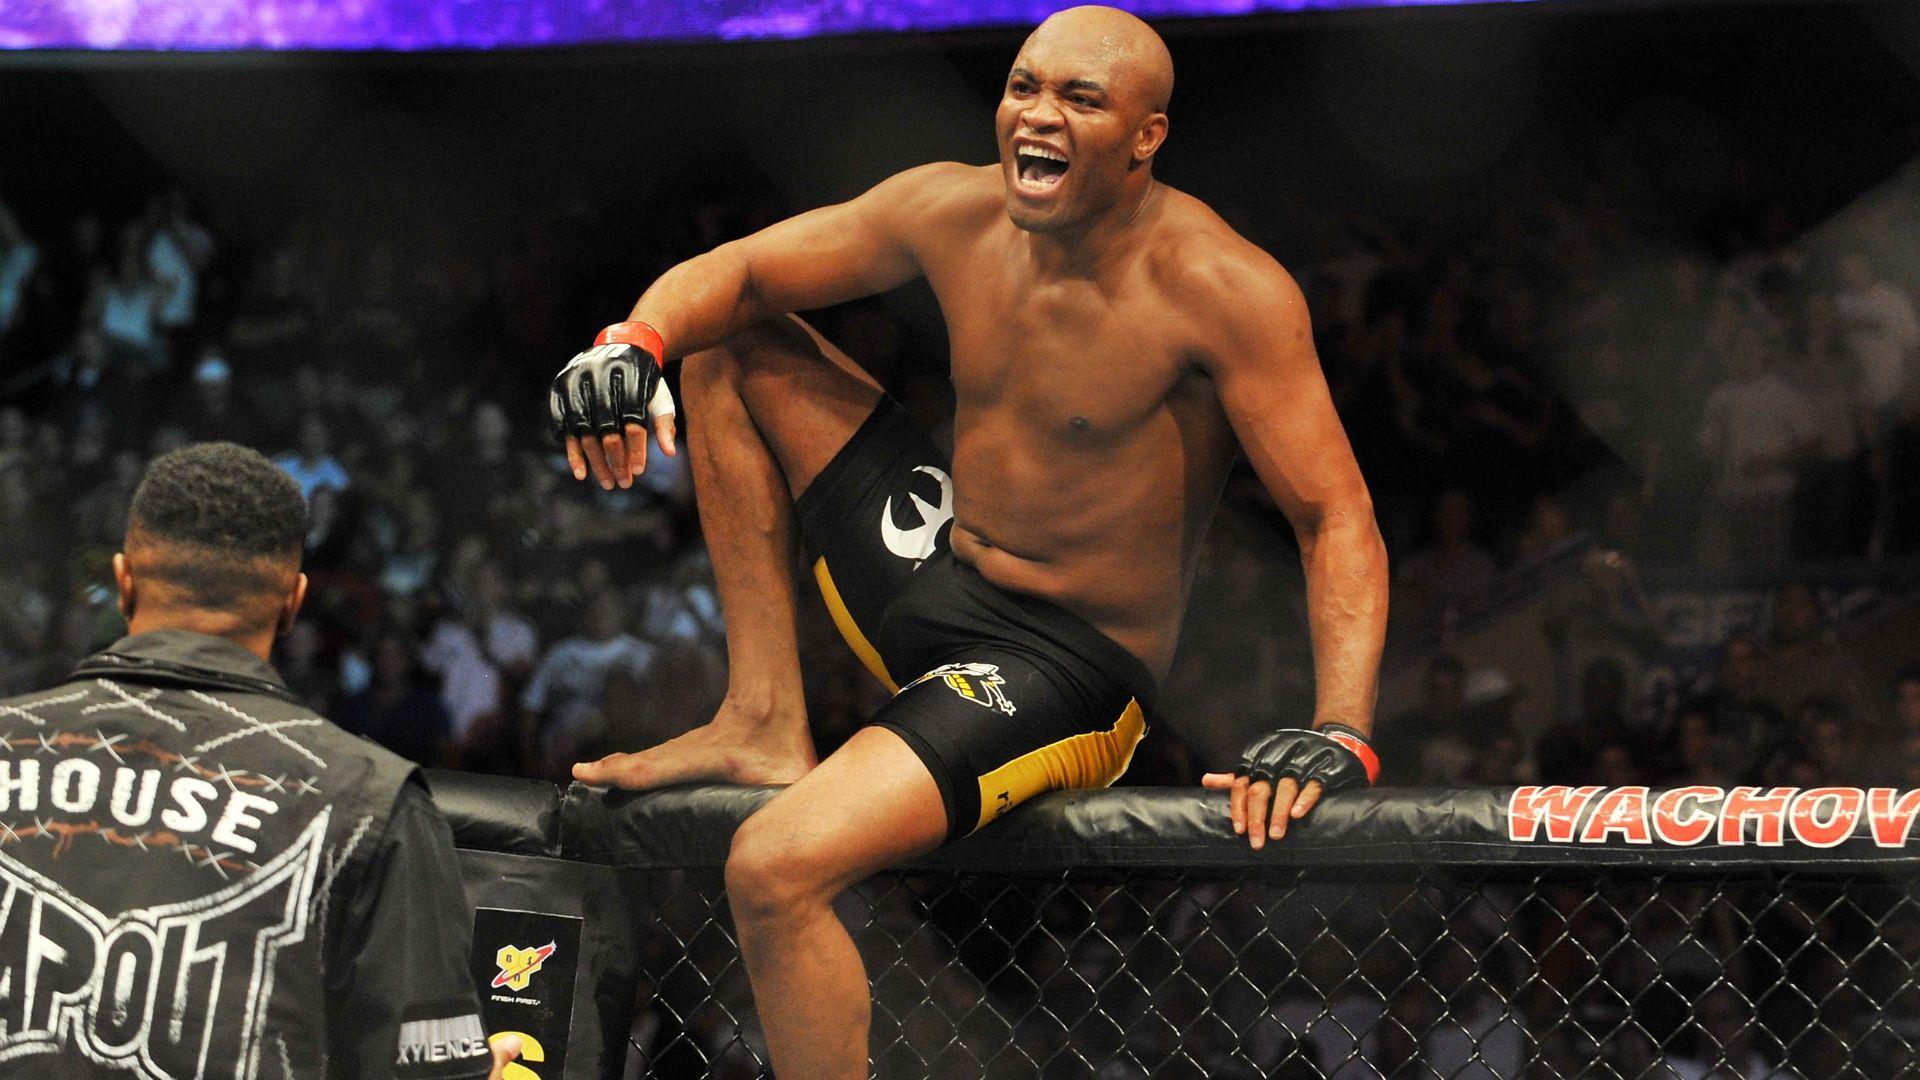 A UFC 234 loss should mark end of Anderson Silva's career. MMA